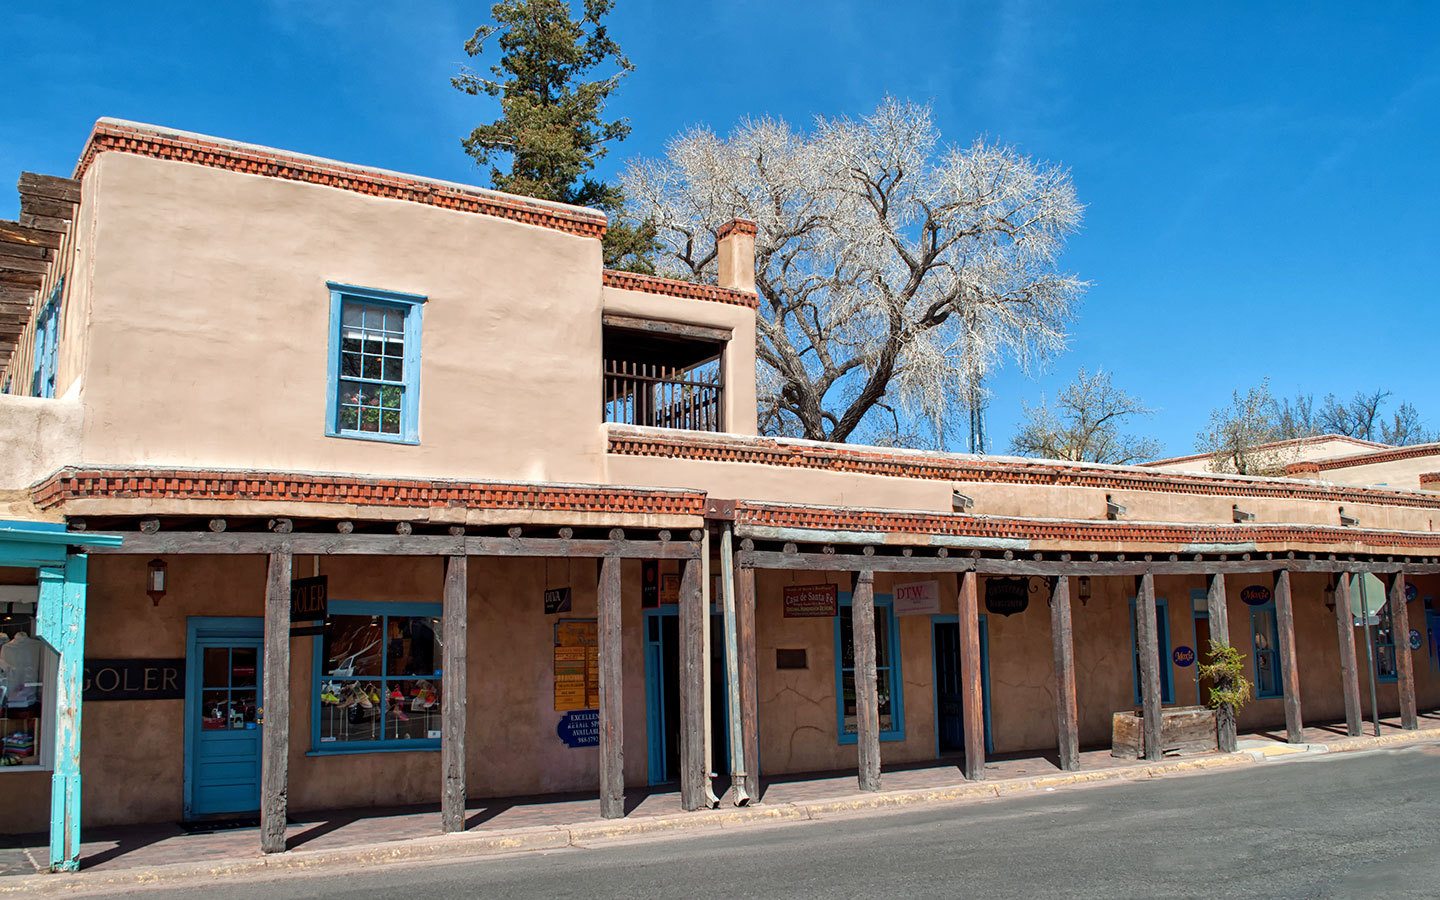 One day in Santa Fe, New Mexico: A 24-hour itinerary